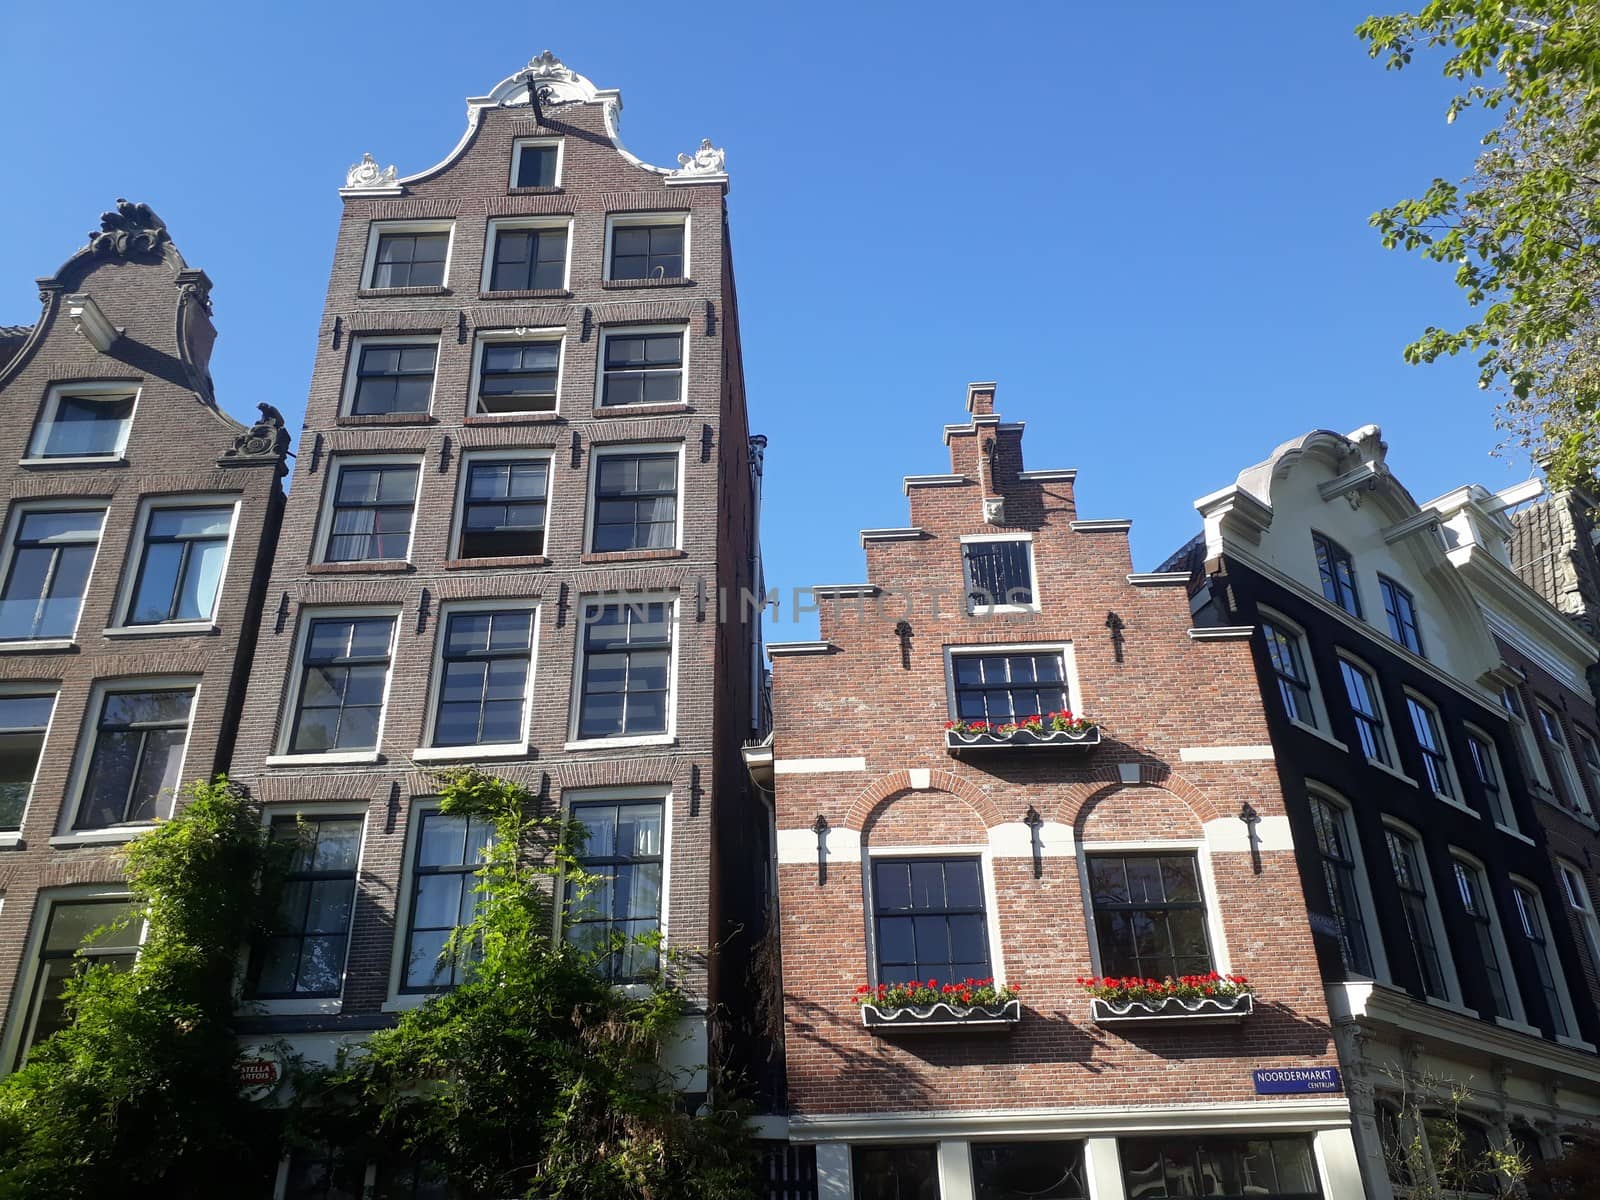 gable ends of houses in amsterdam holland by AndrewUK